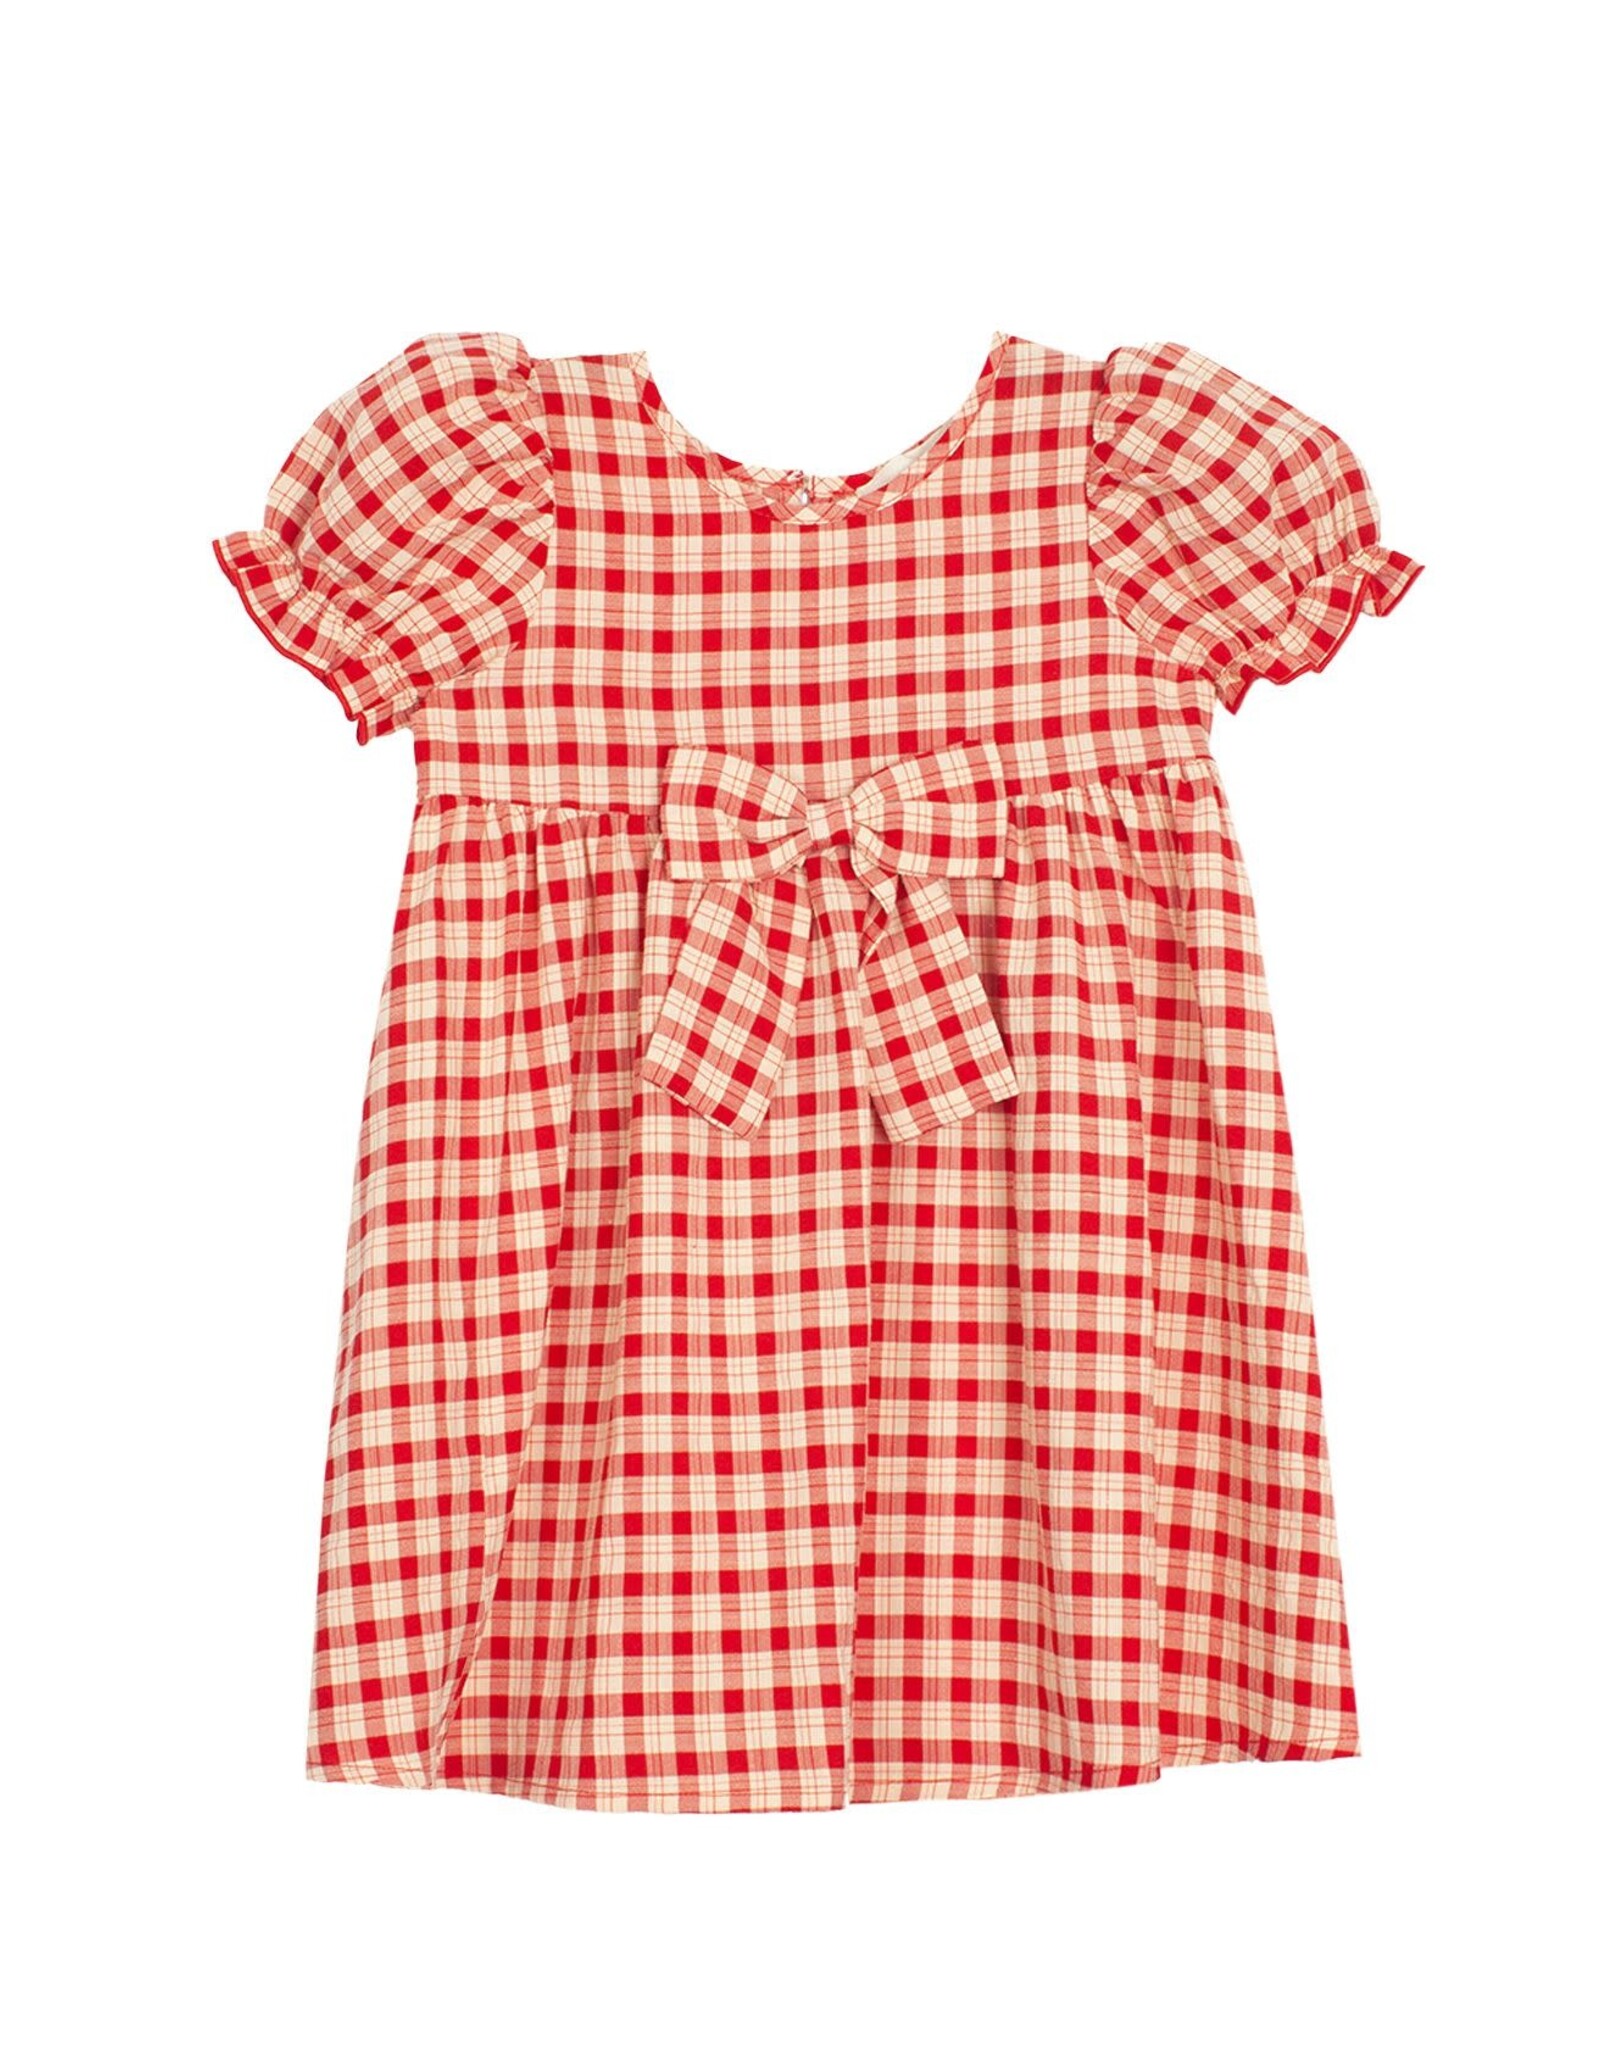 Mabel and Honey Paisley Woven Plaid Dress - Red